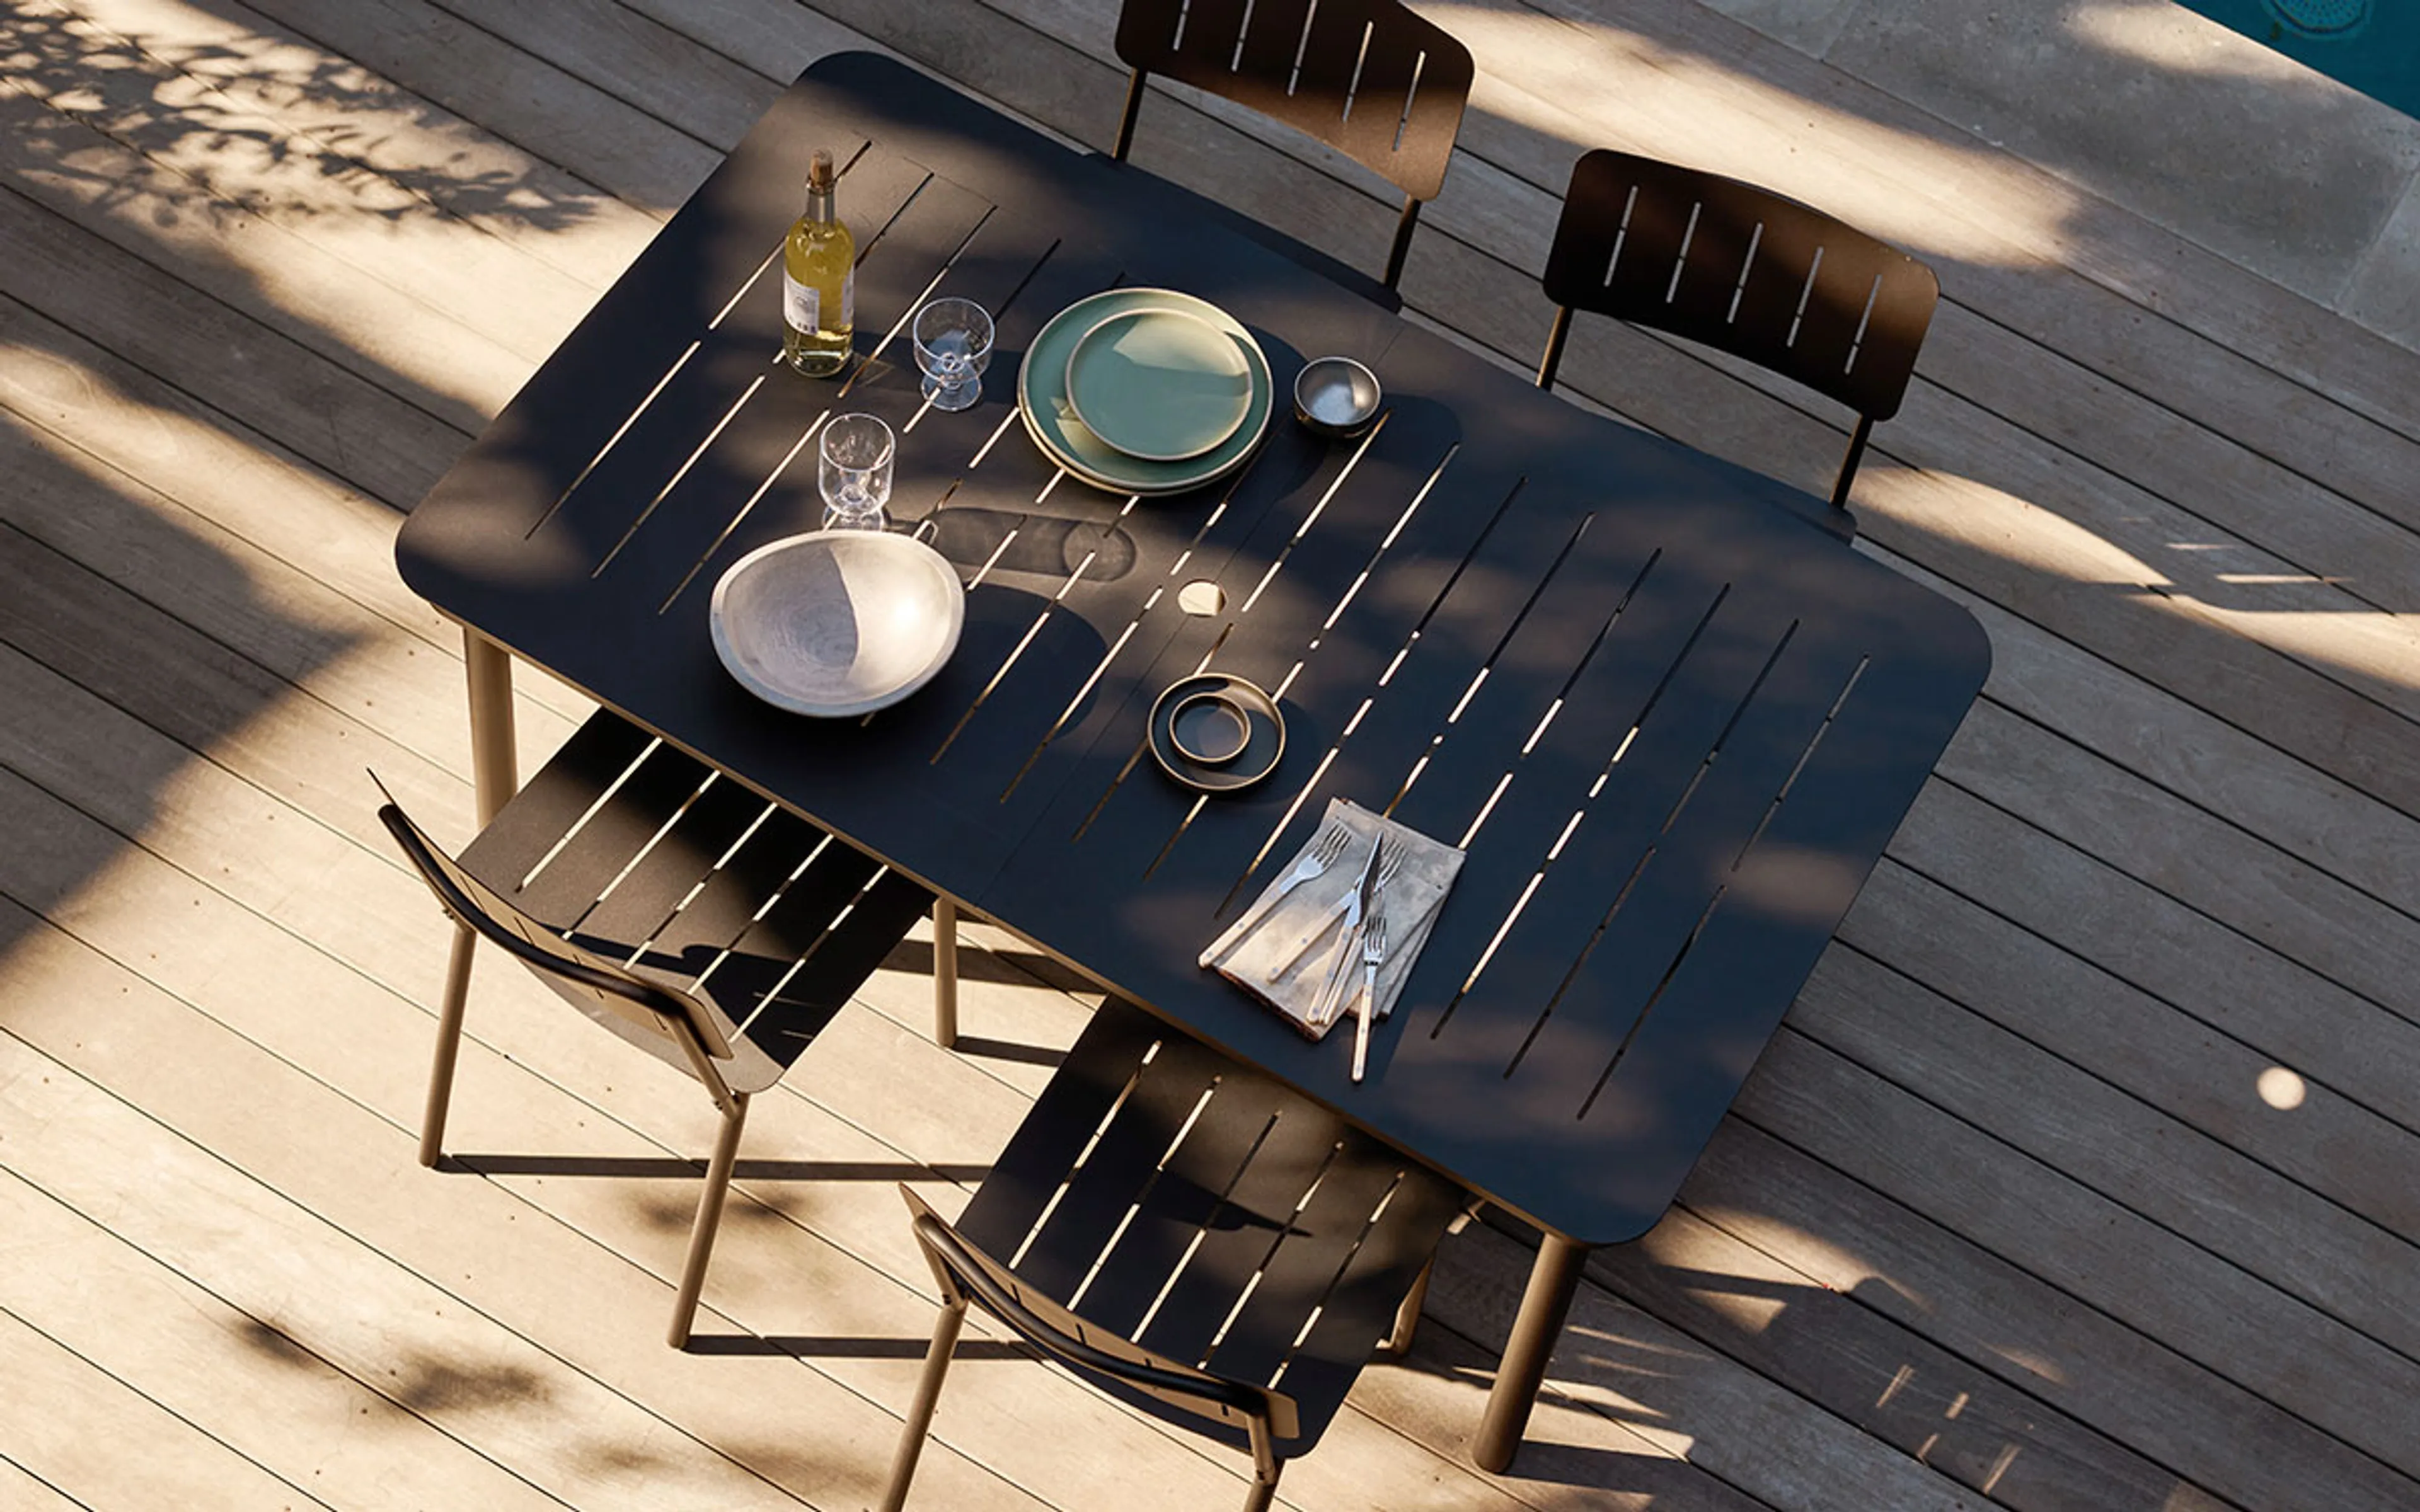 Relay Outdoor Dining Table